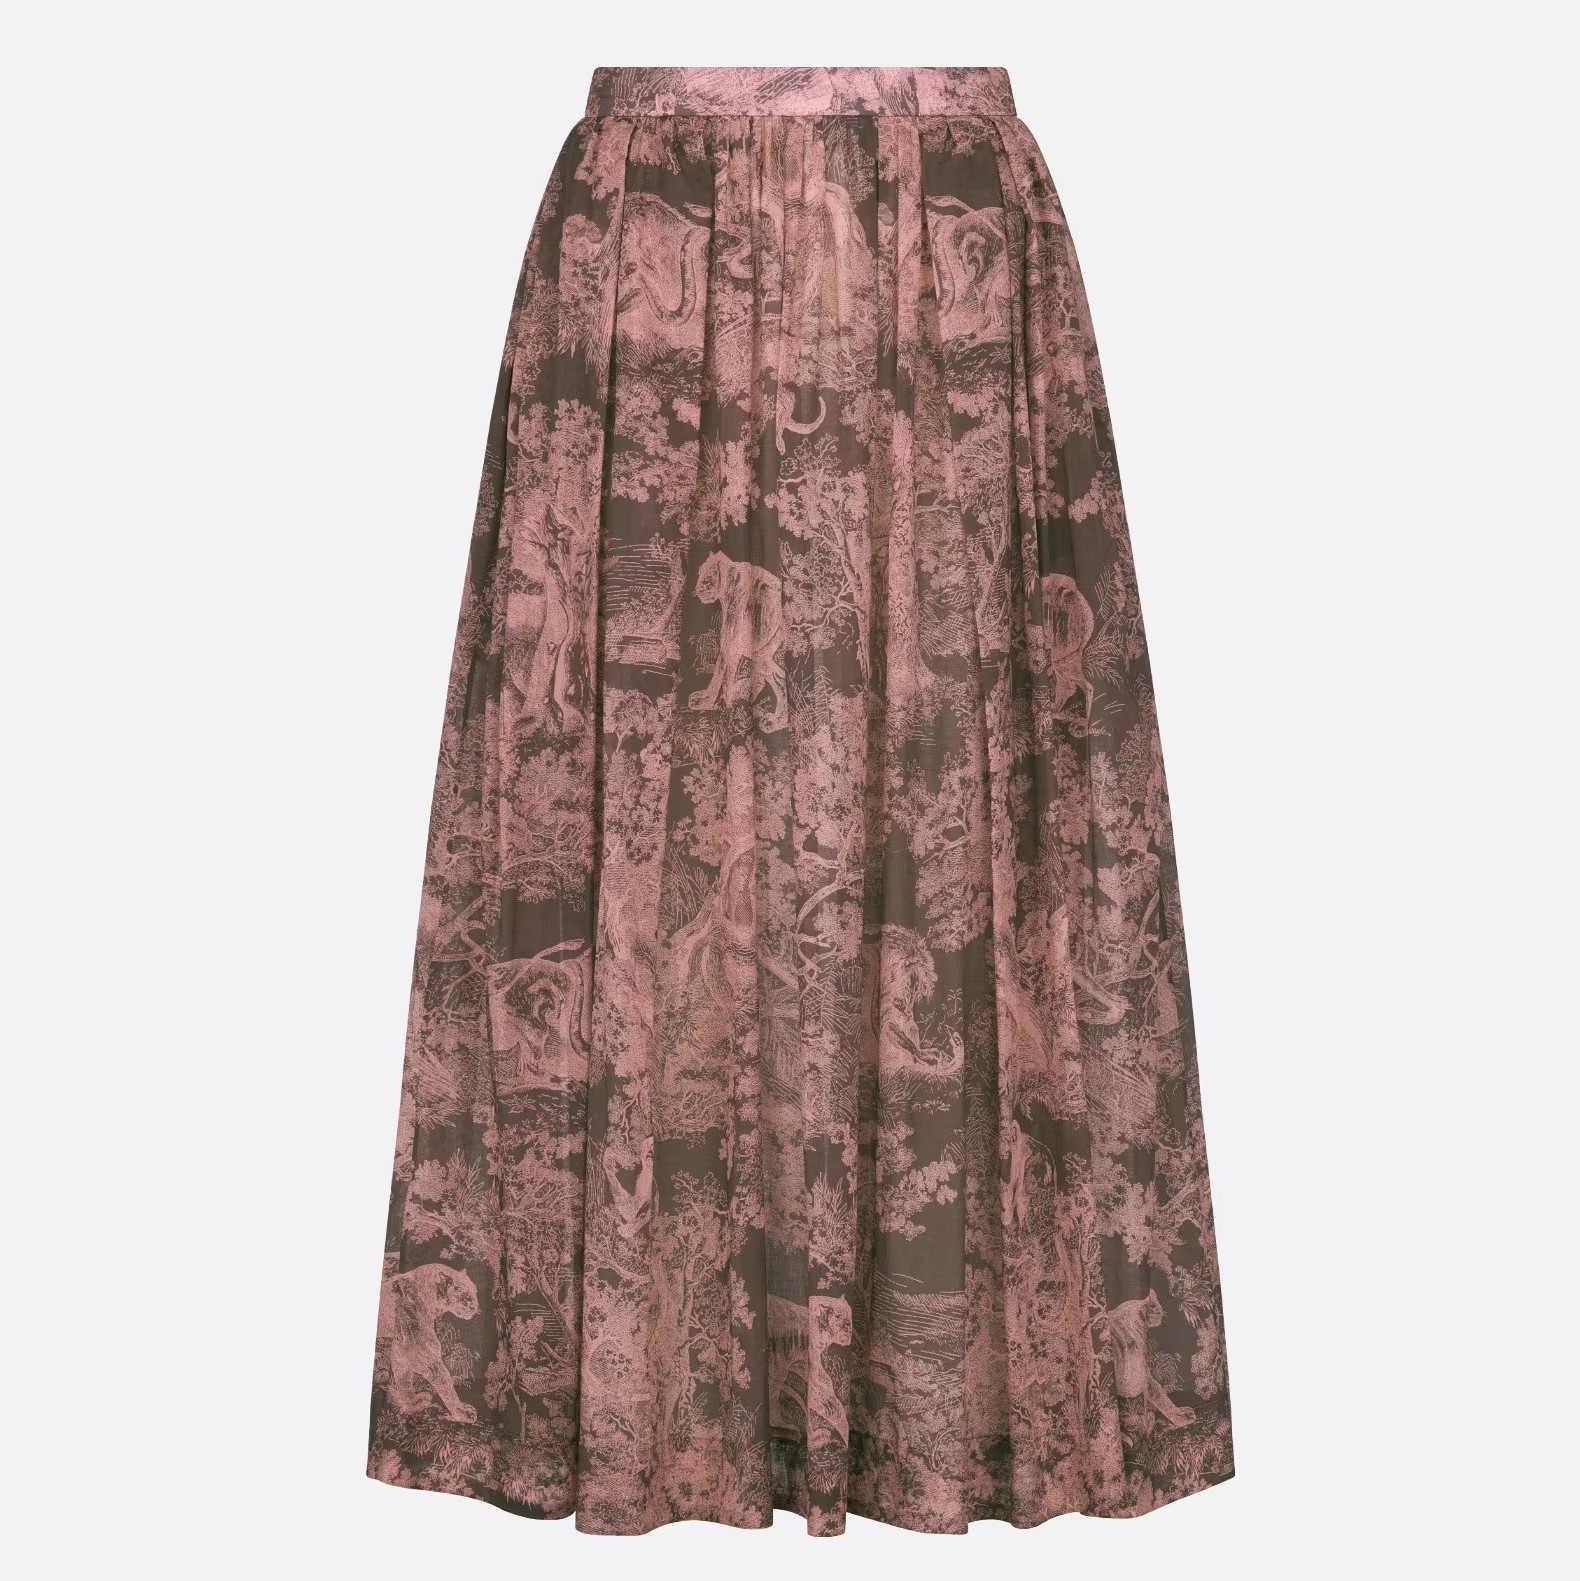 VÁY NỮ DÀI DIORIVIERA FLARED SKIRT GRAY AND PINK COTTON MUSLIN WITH TOILE DE JOUY REVERSE MOTIF 3